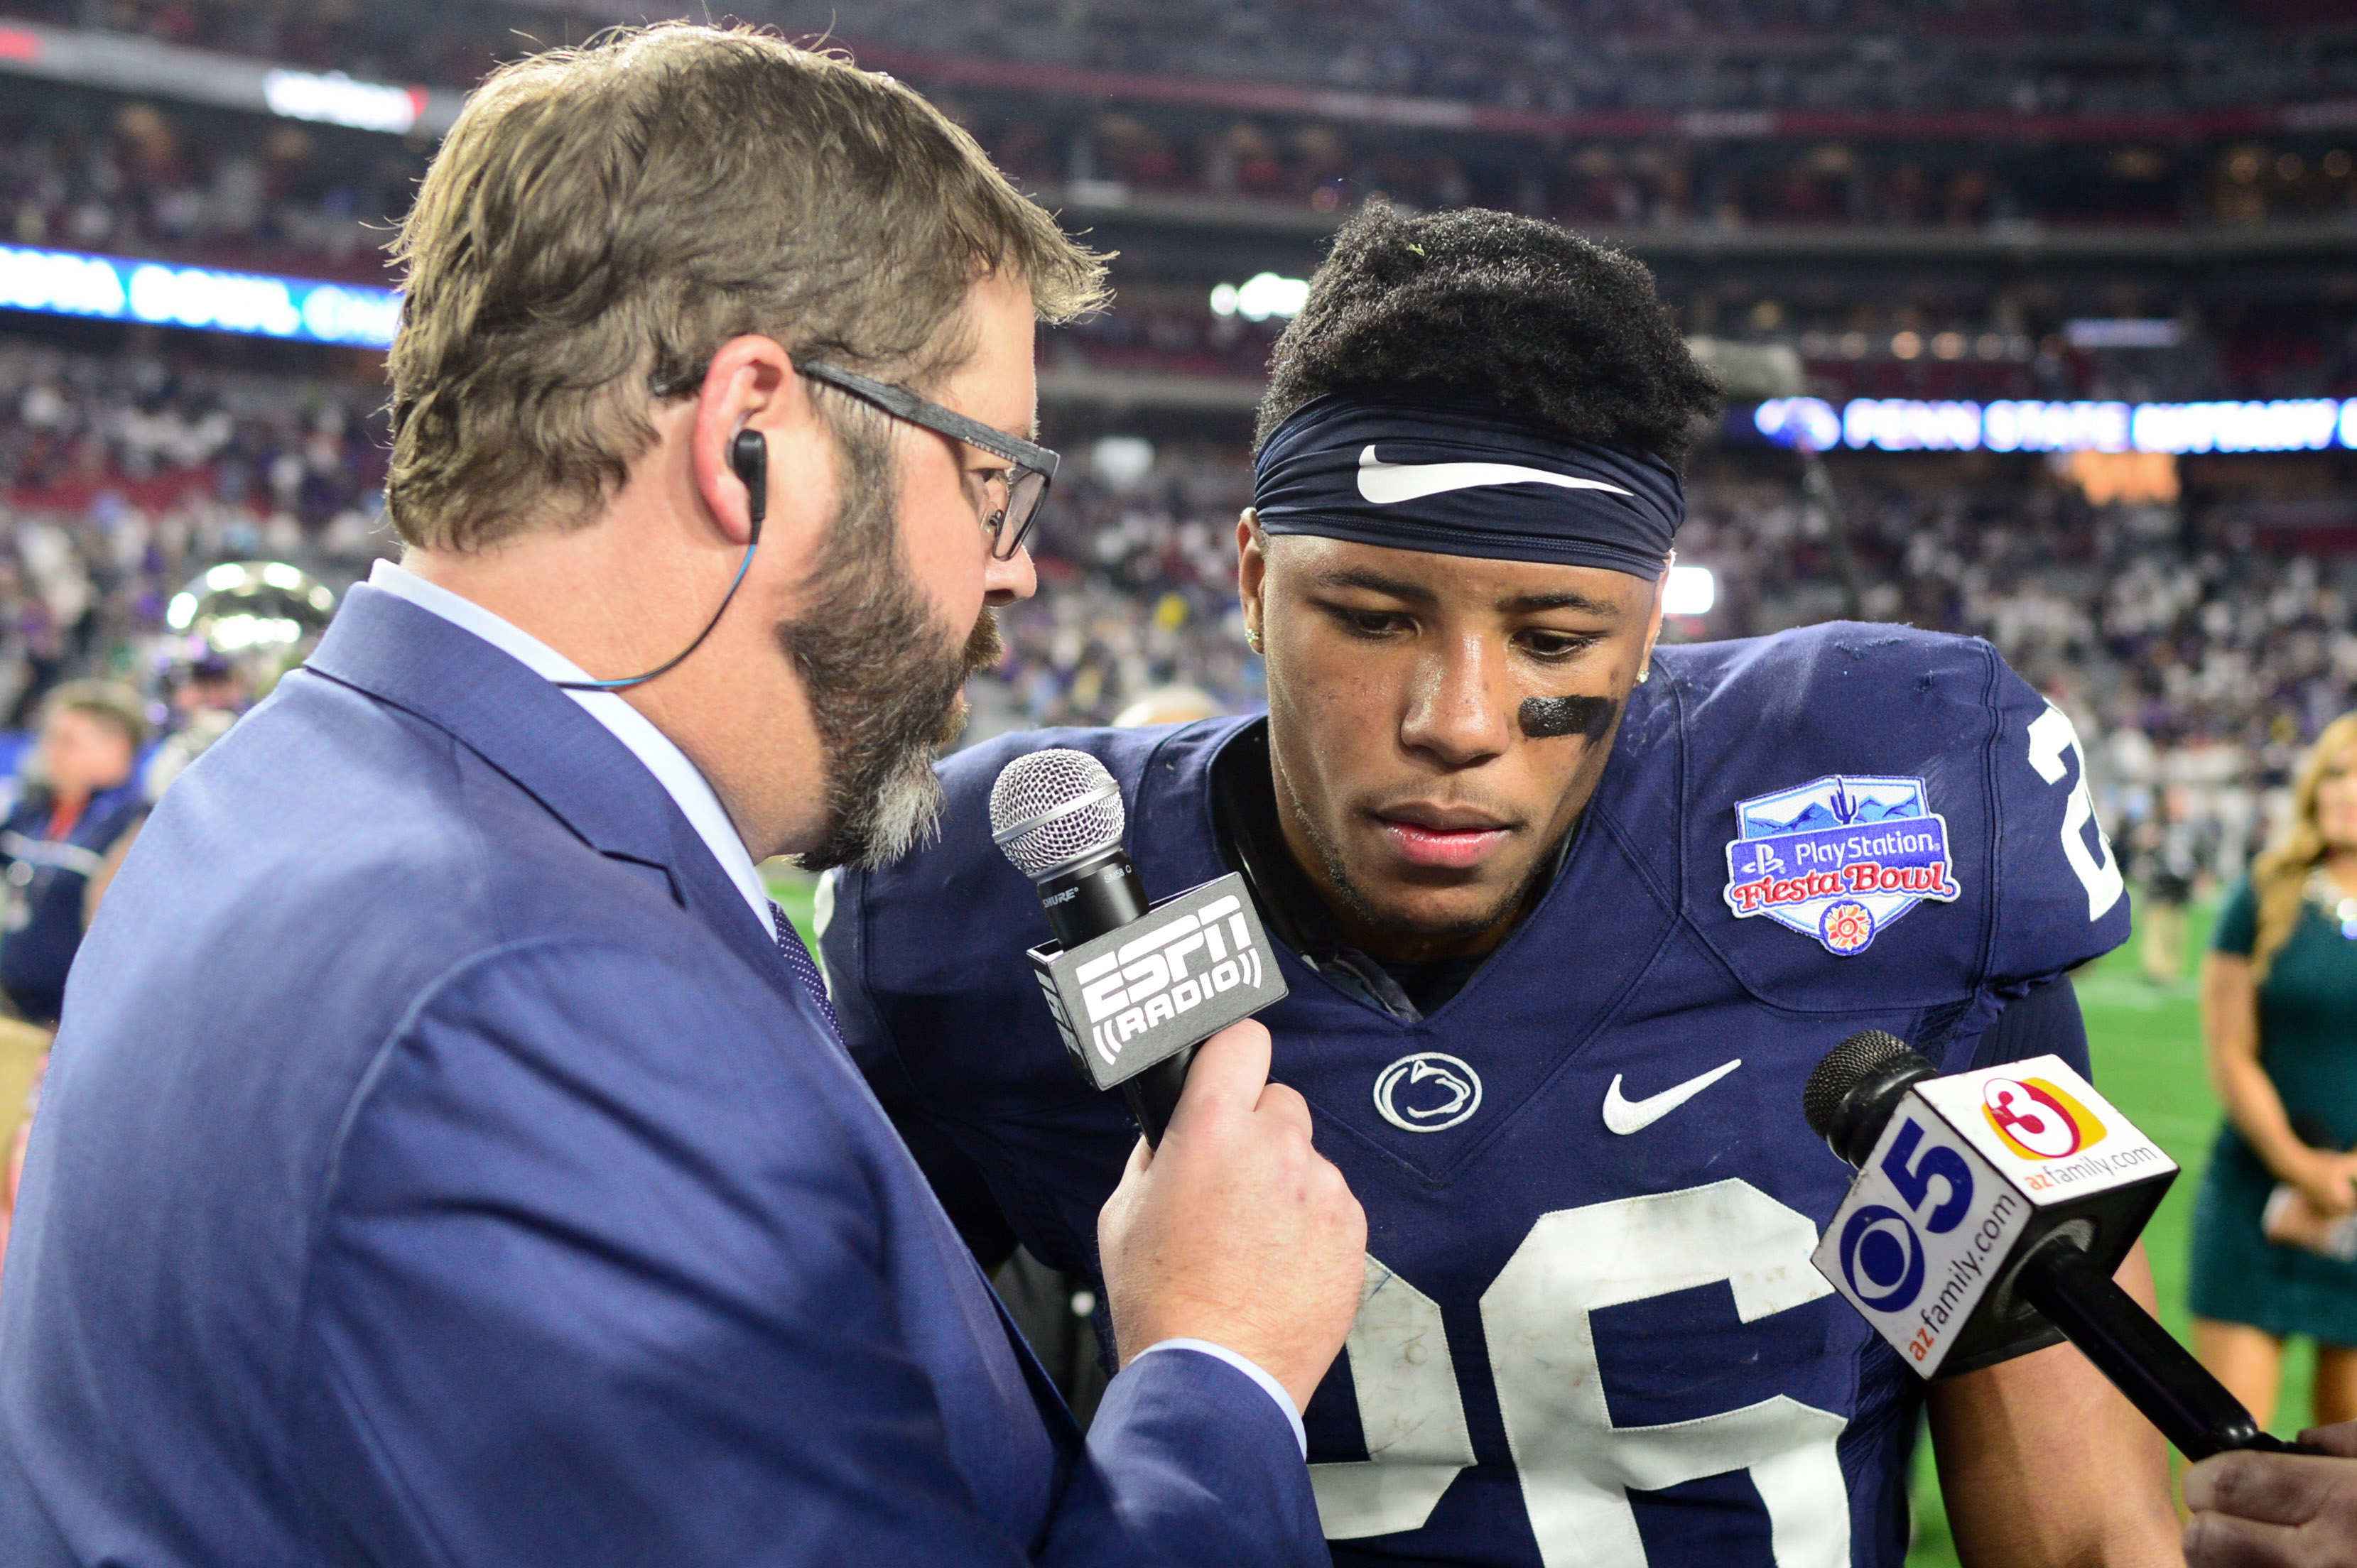 Saquon Barkley declares for NFL Draft on New Year's Eve